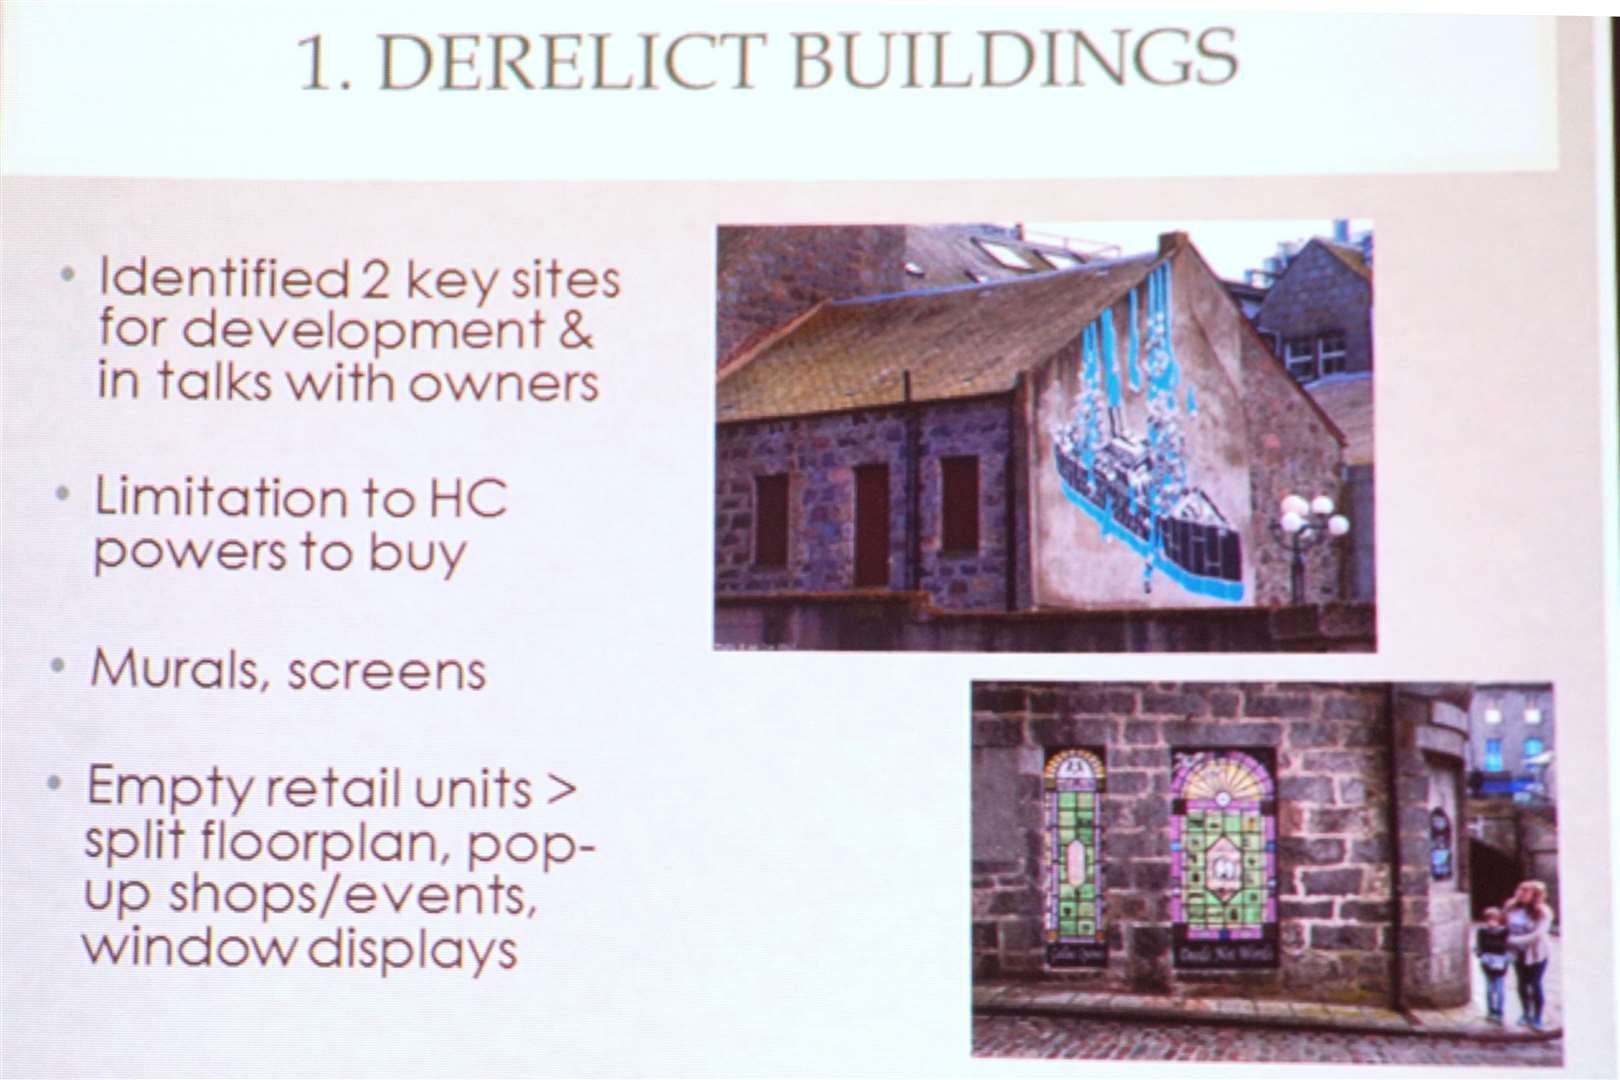 This slide from the regeneration meeting in Wick on Monday shows how derelict buildings could be spruced up.